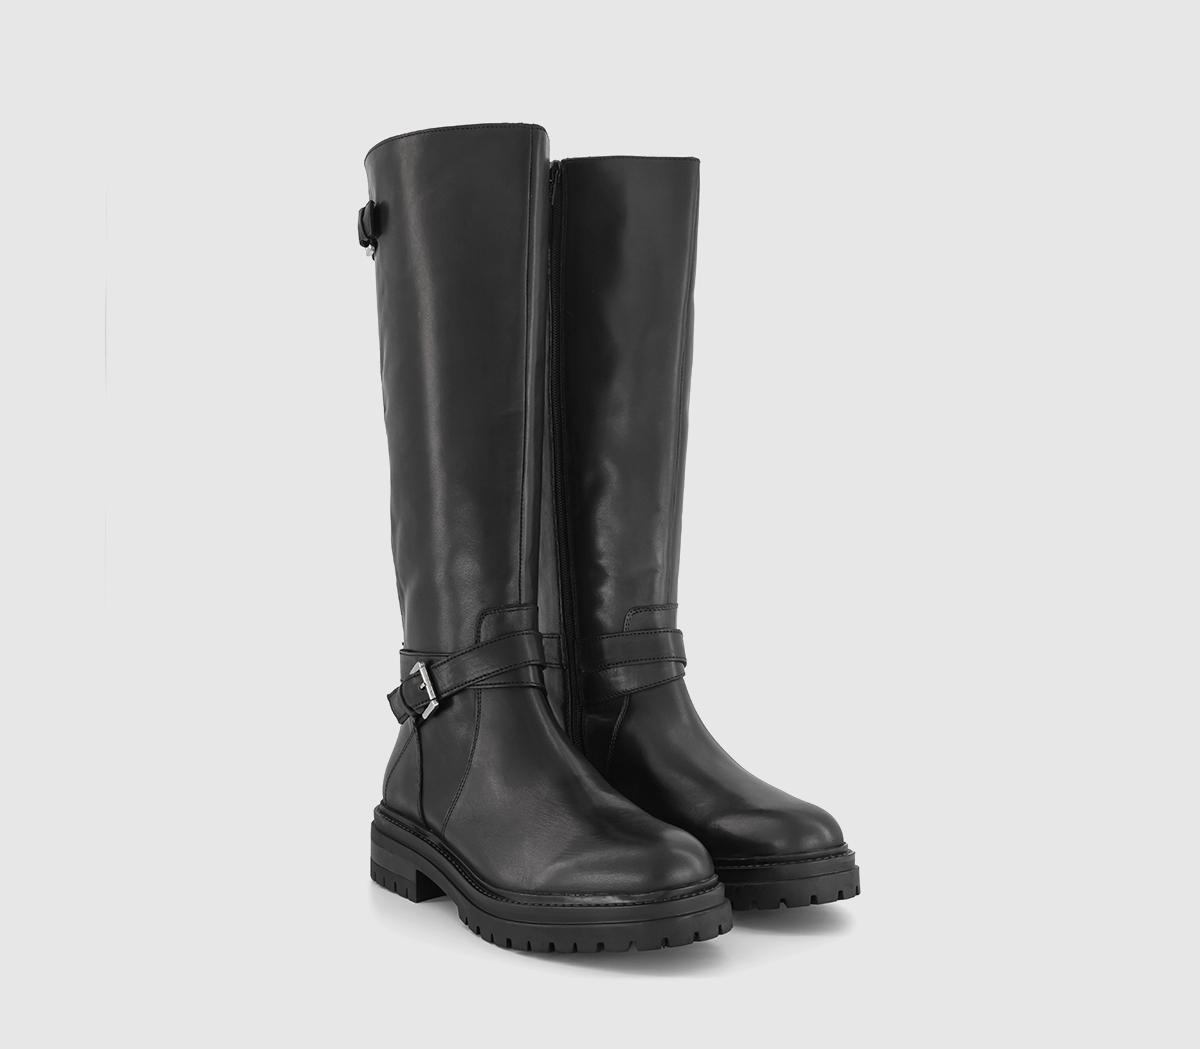 OFFICE Womens Krissy Buckle Strap Knee High Rider Boots Black Leather, 3